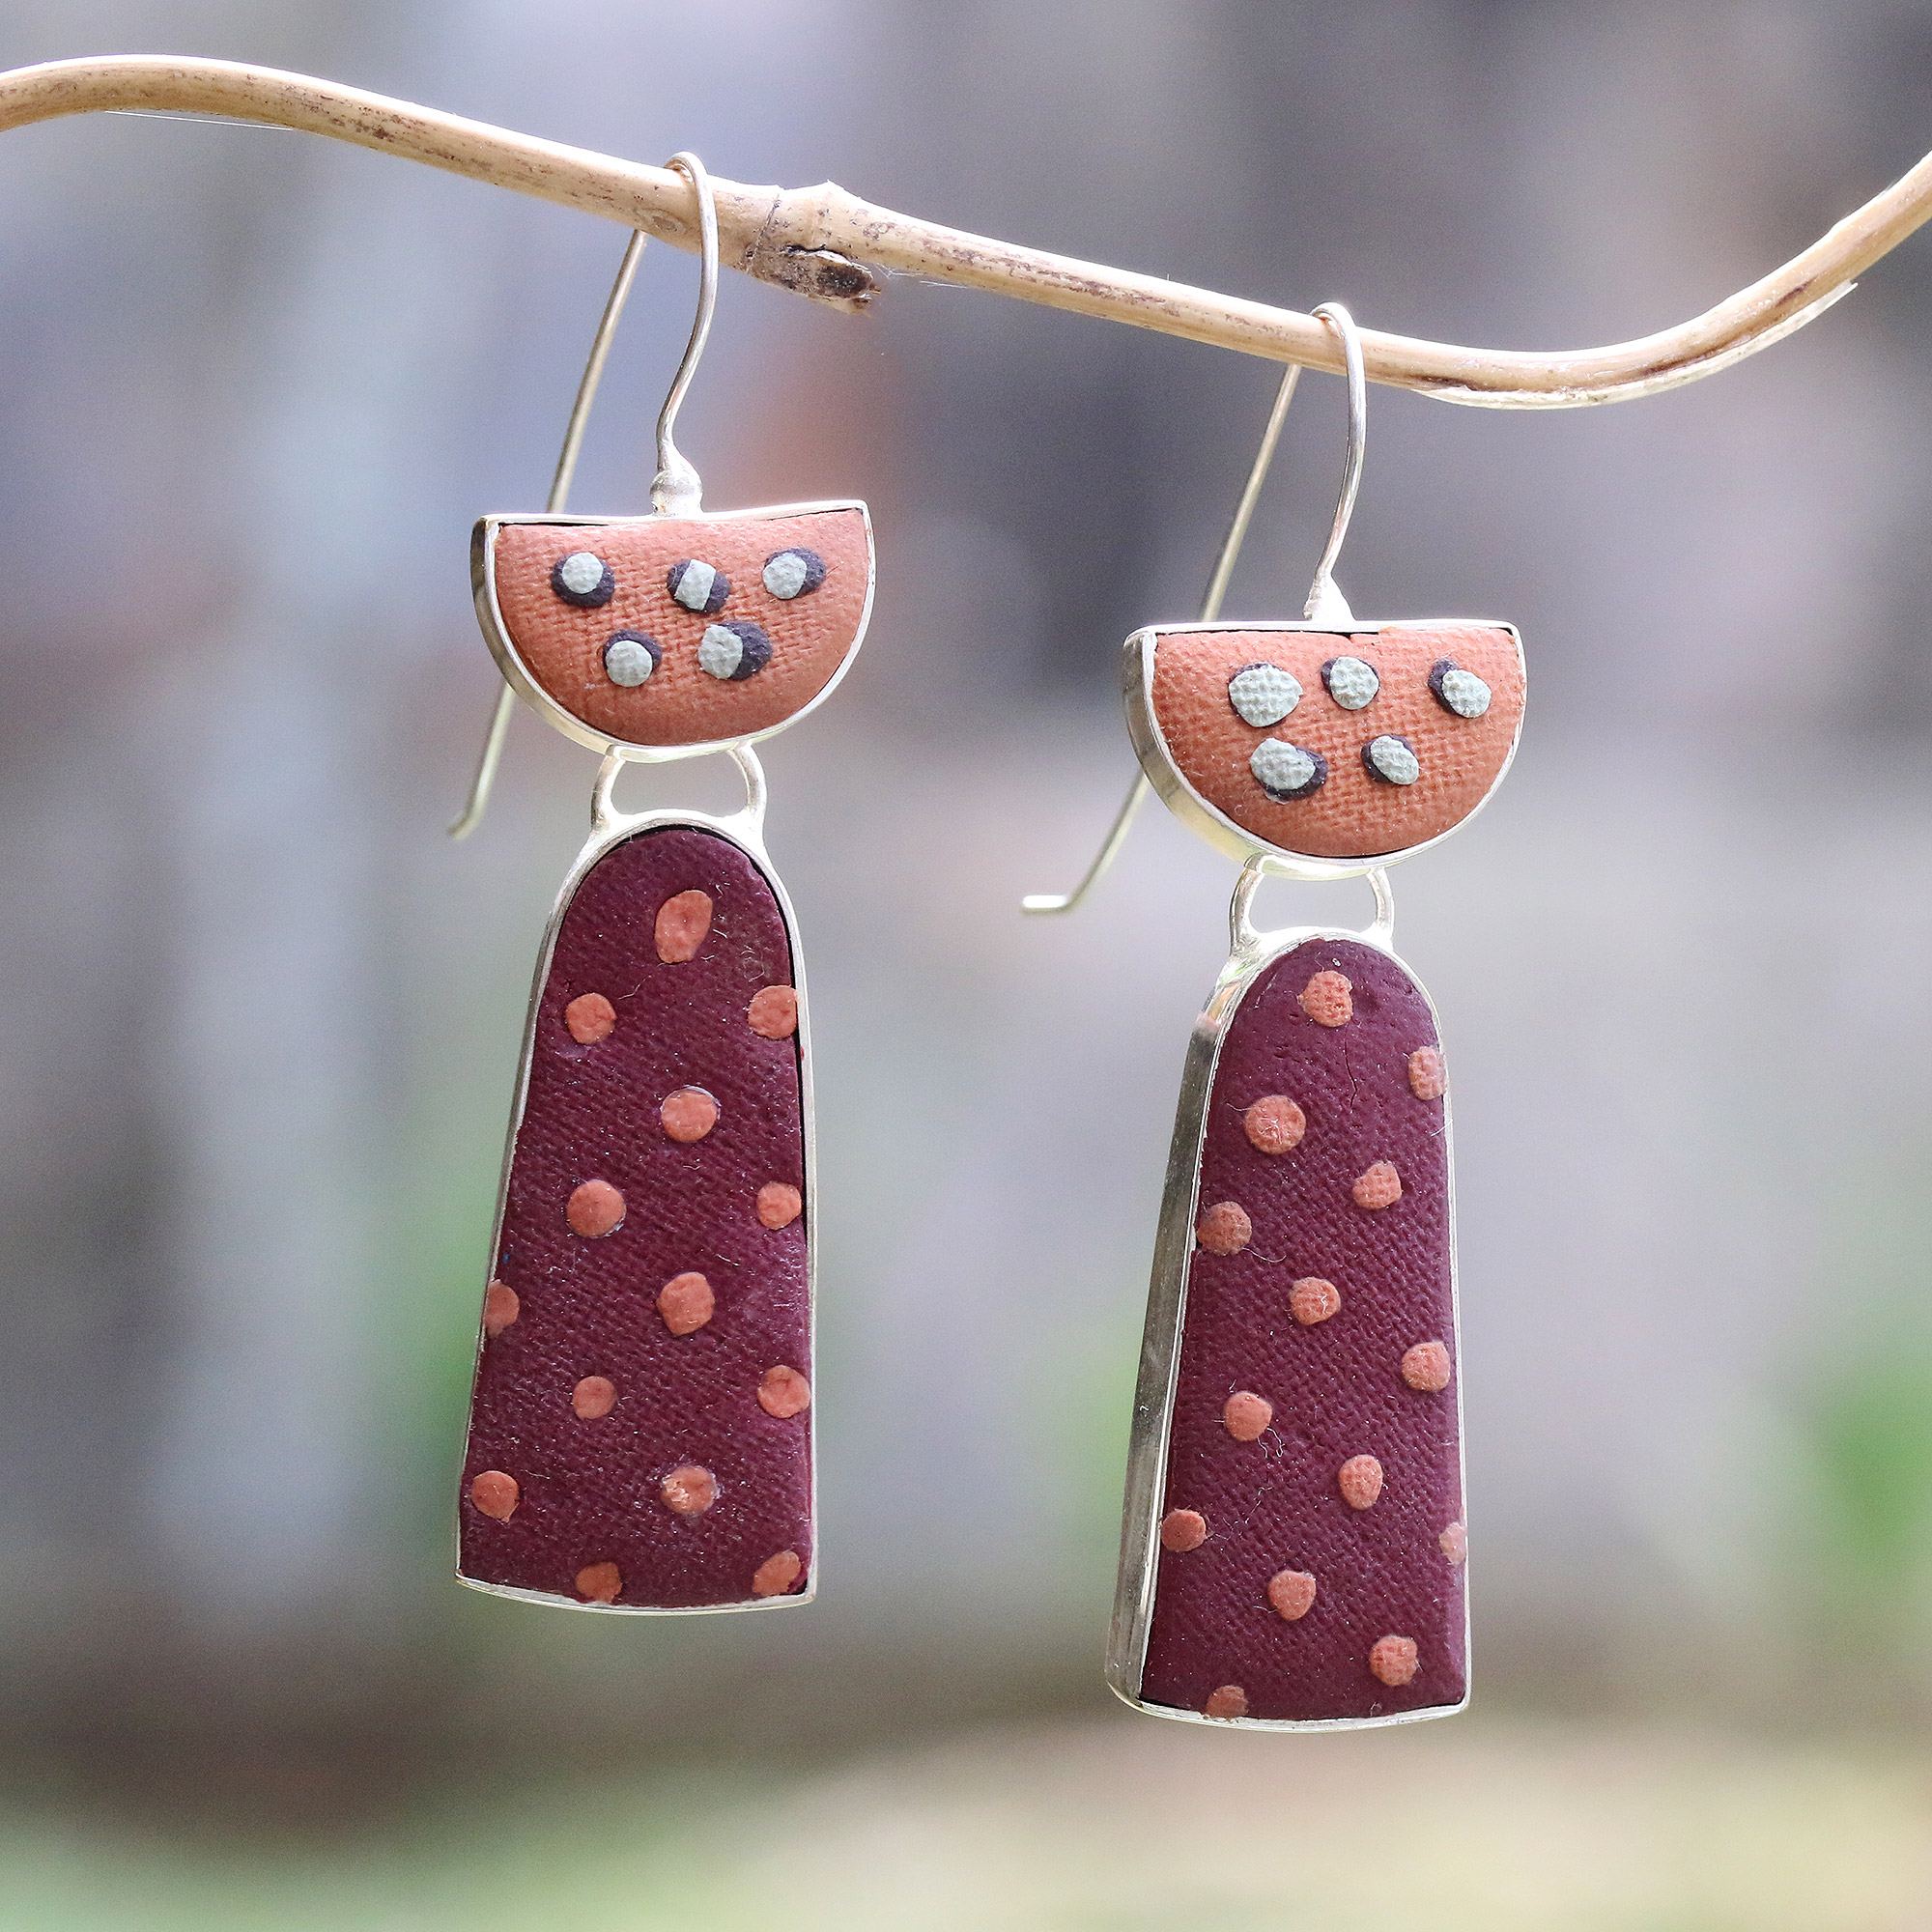 Trendy earrings with abstract pattern Pretty clay jewelry for gift. Geometric earrings drop with silver hoops Unique earrings for women